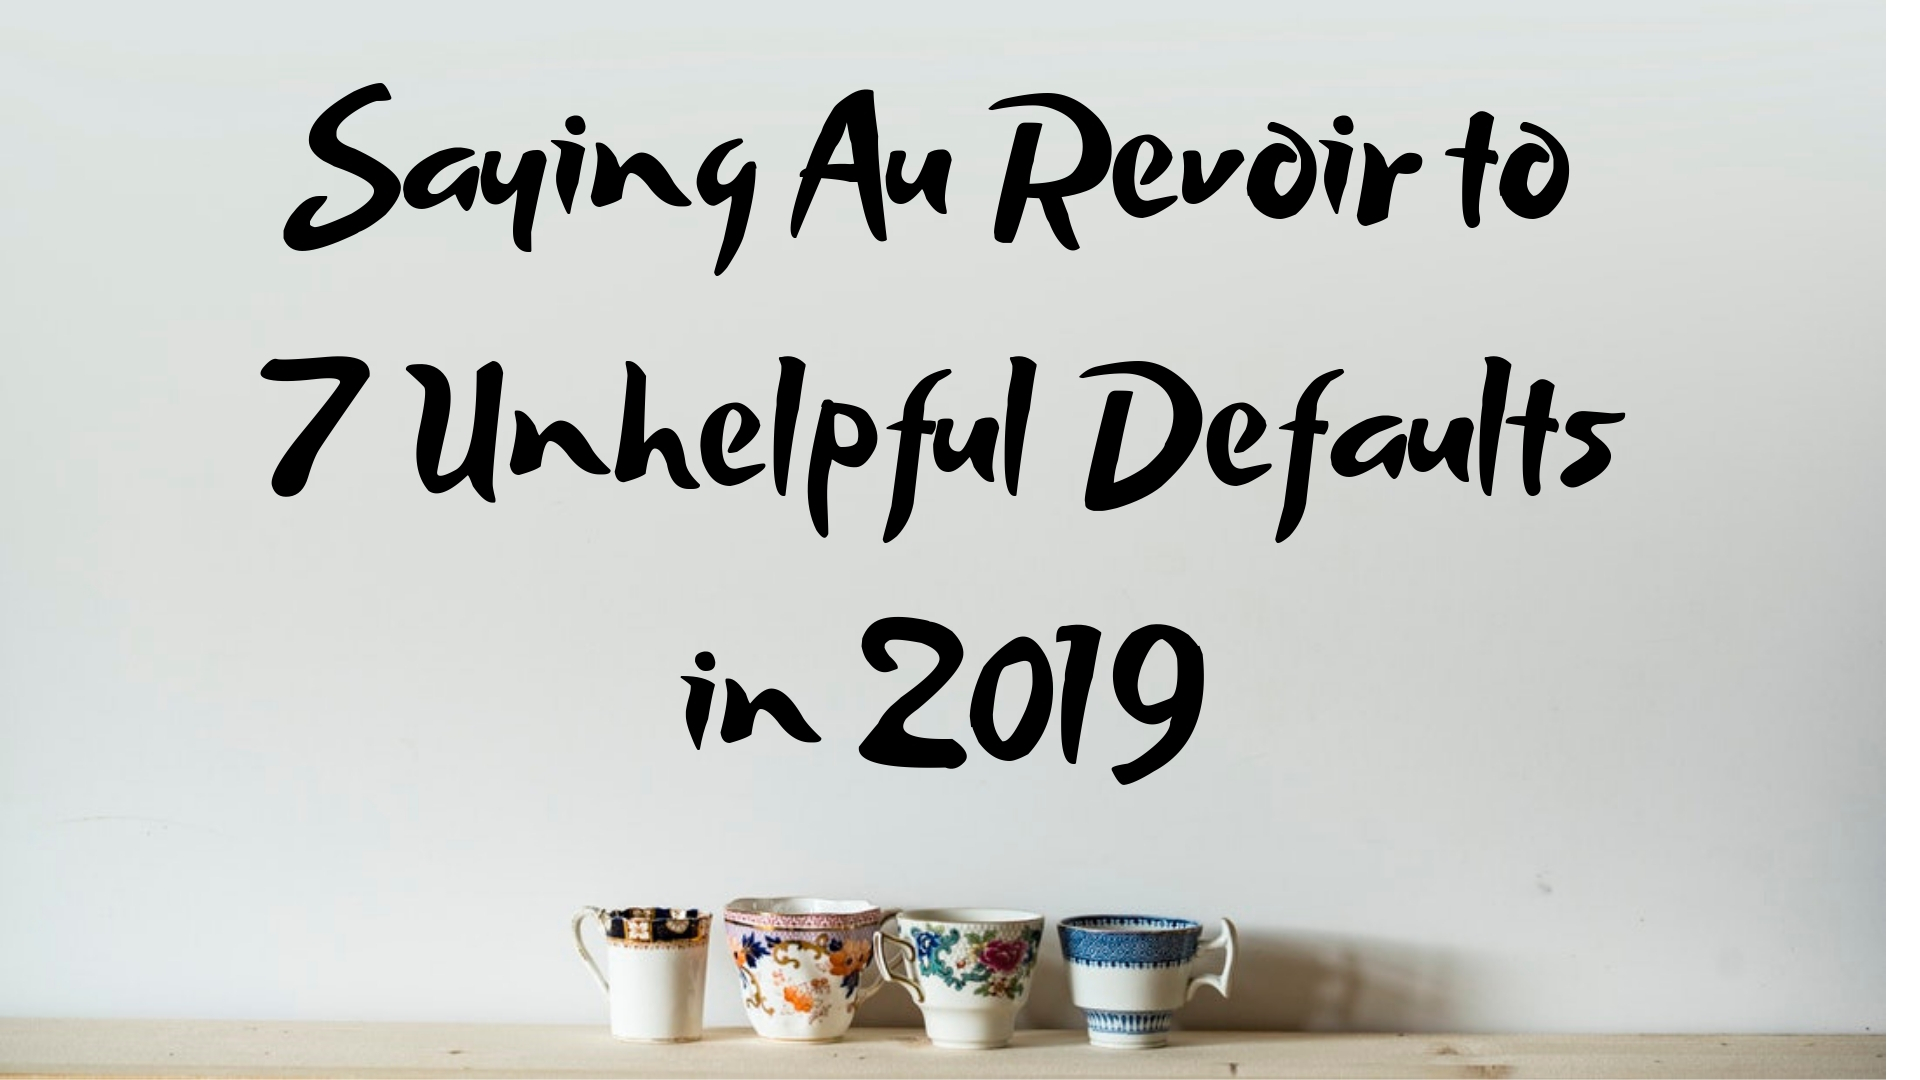 Saying Au Revoir to 7 Unhelpful Defaults in 2019